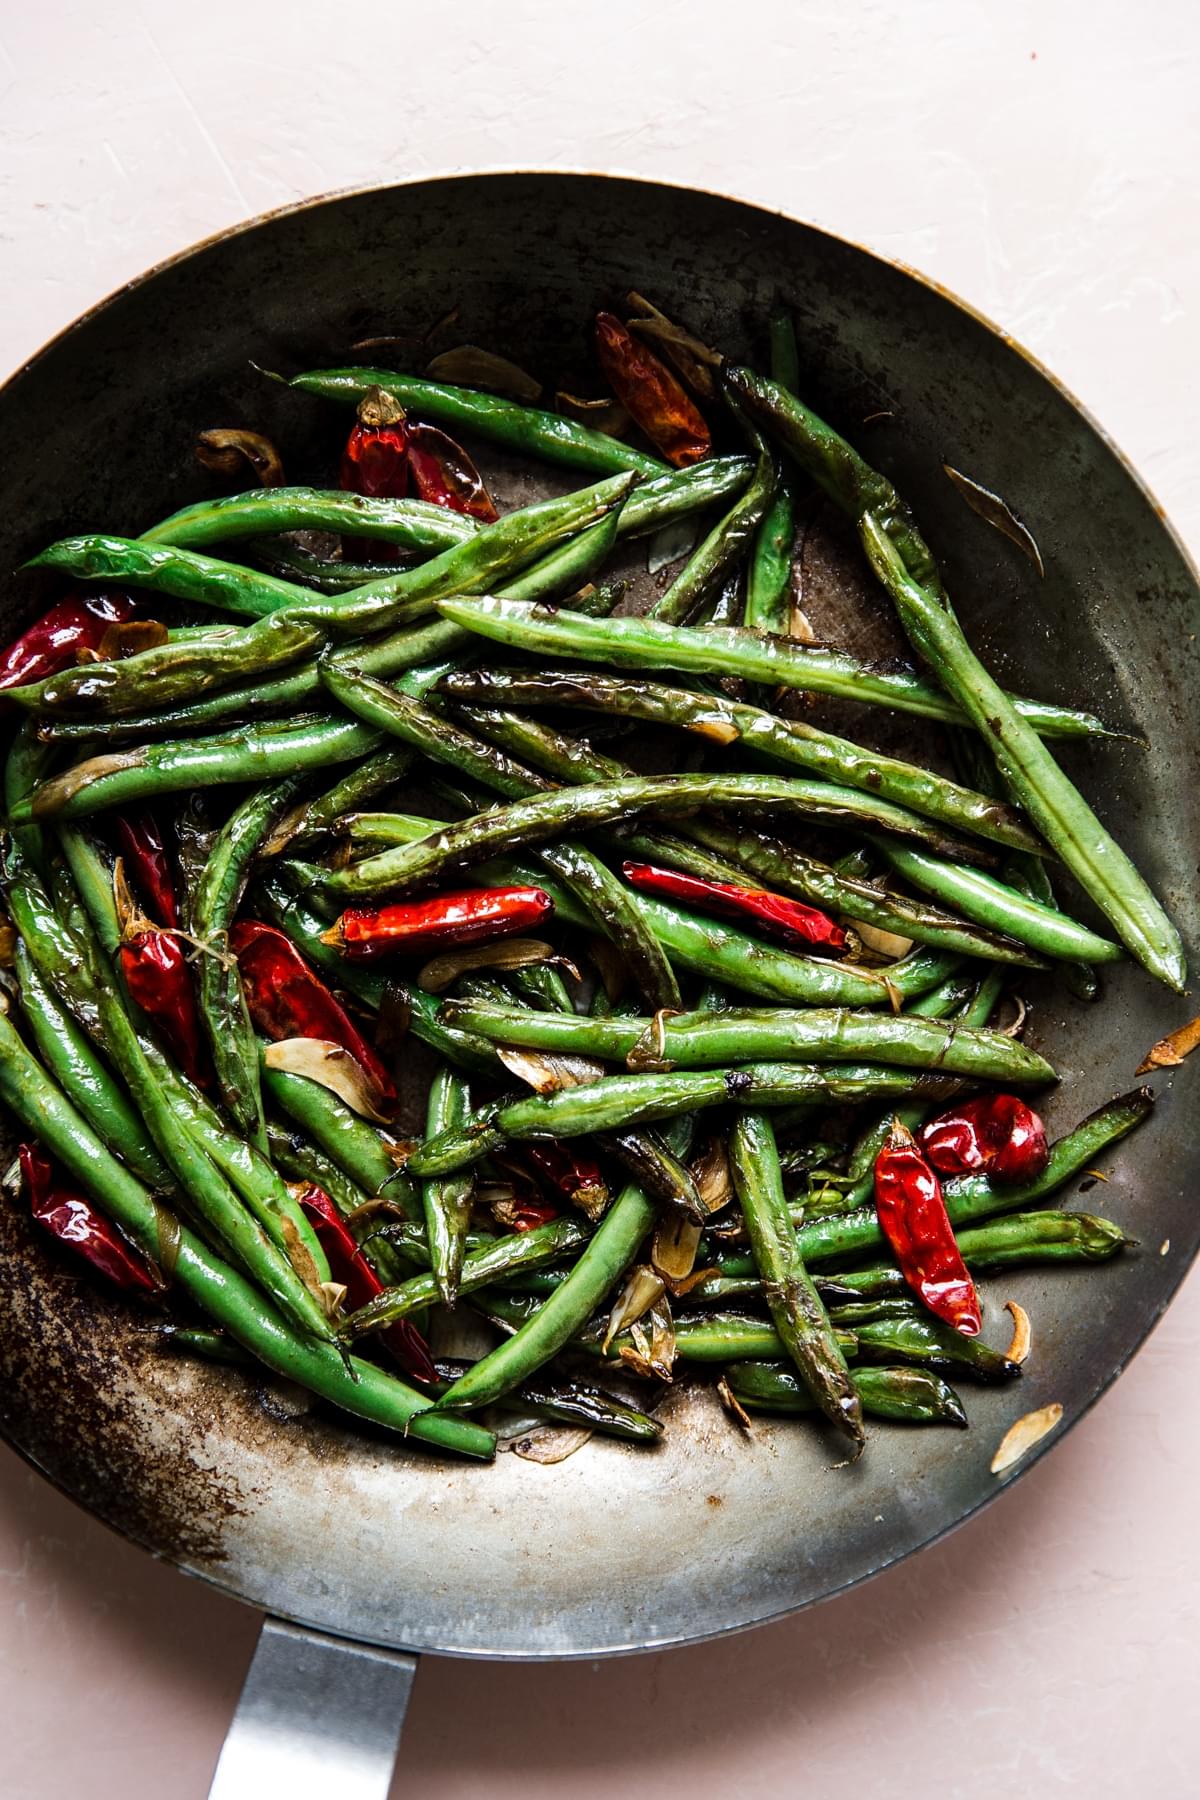 dry fried green beans in a skillet with dried chillies and sliced garlic cloves